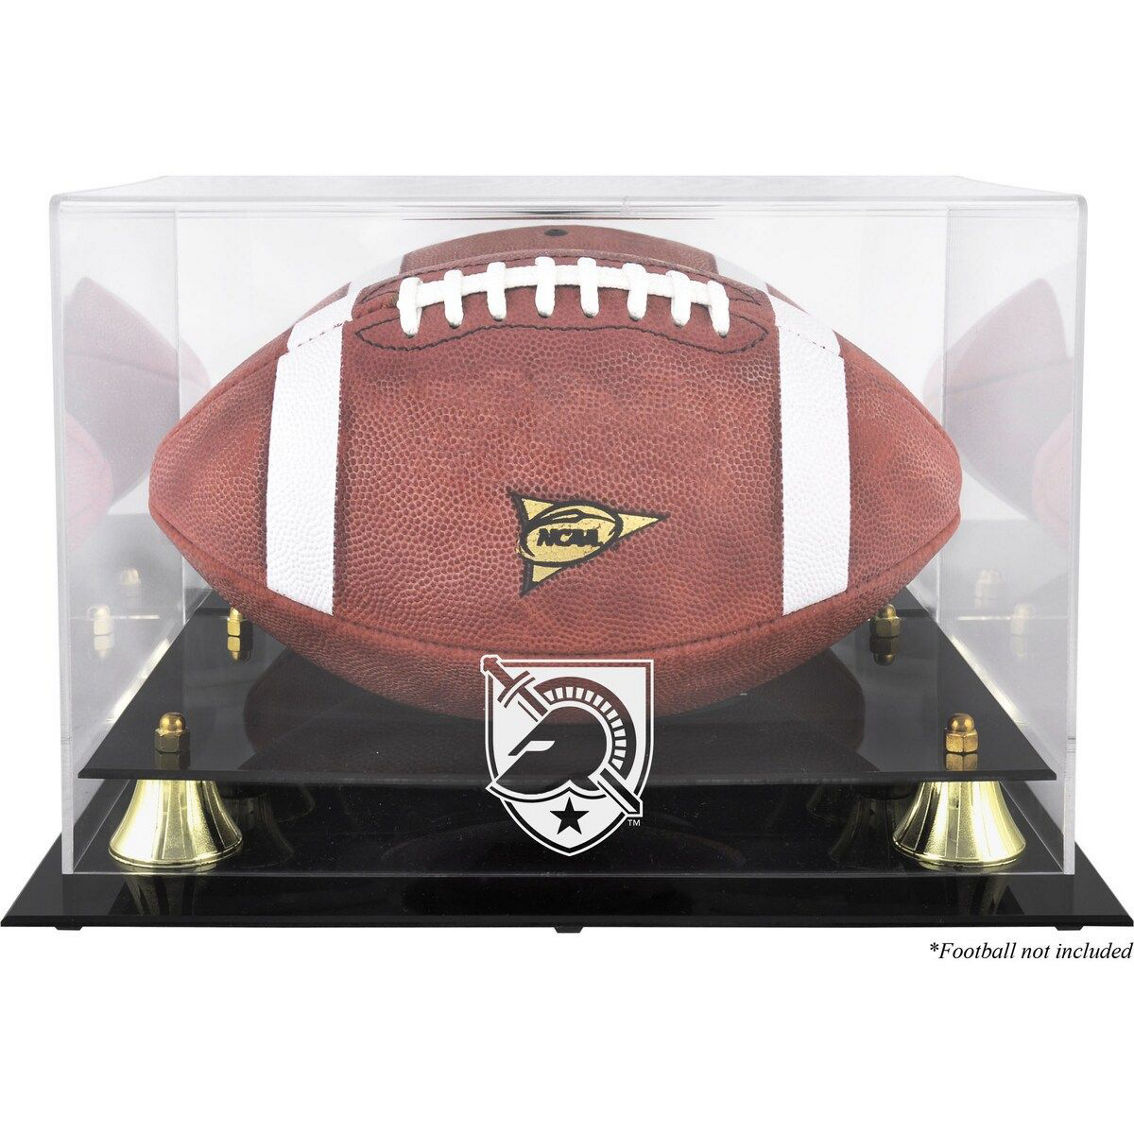 Fanatics Authentic Army Black Knights Golden Classic (2015-Present Logo) Football Display Case with Mirror Back - Image 2 of 2